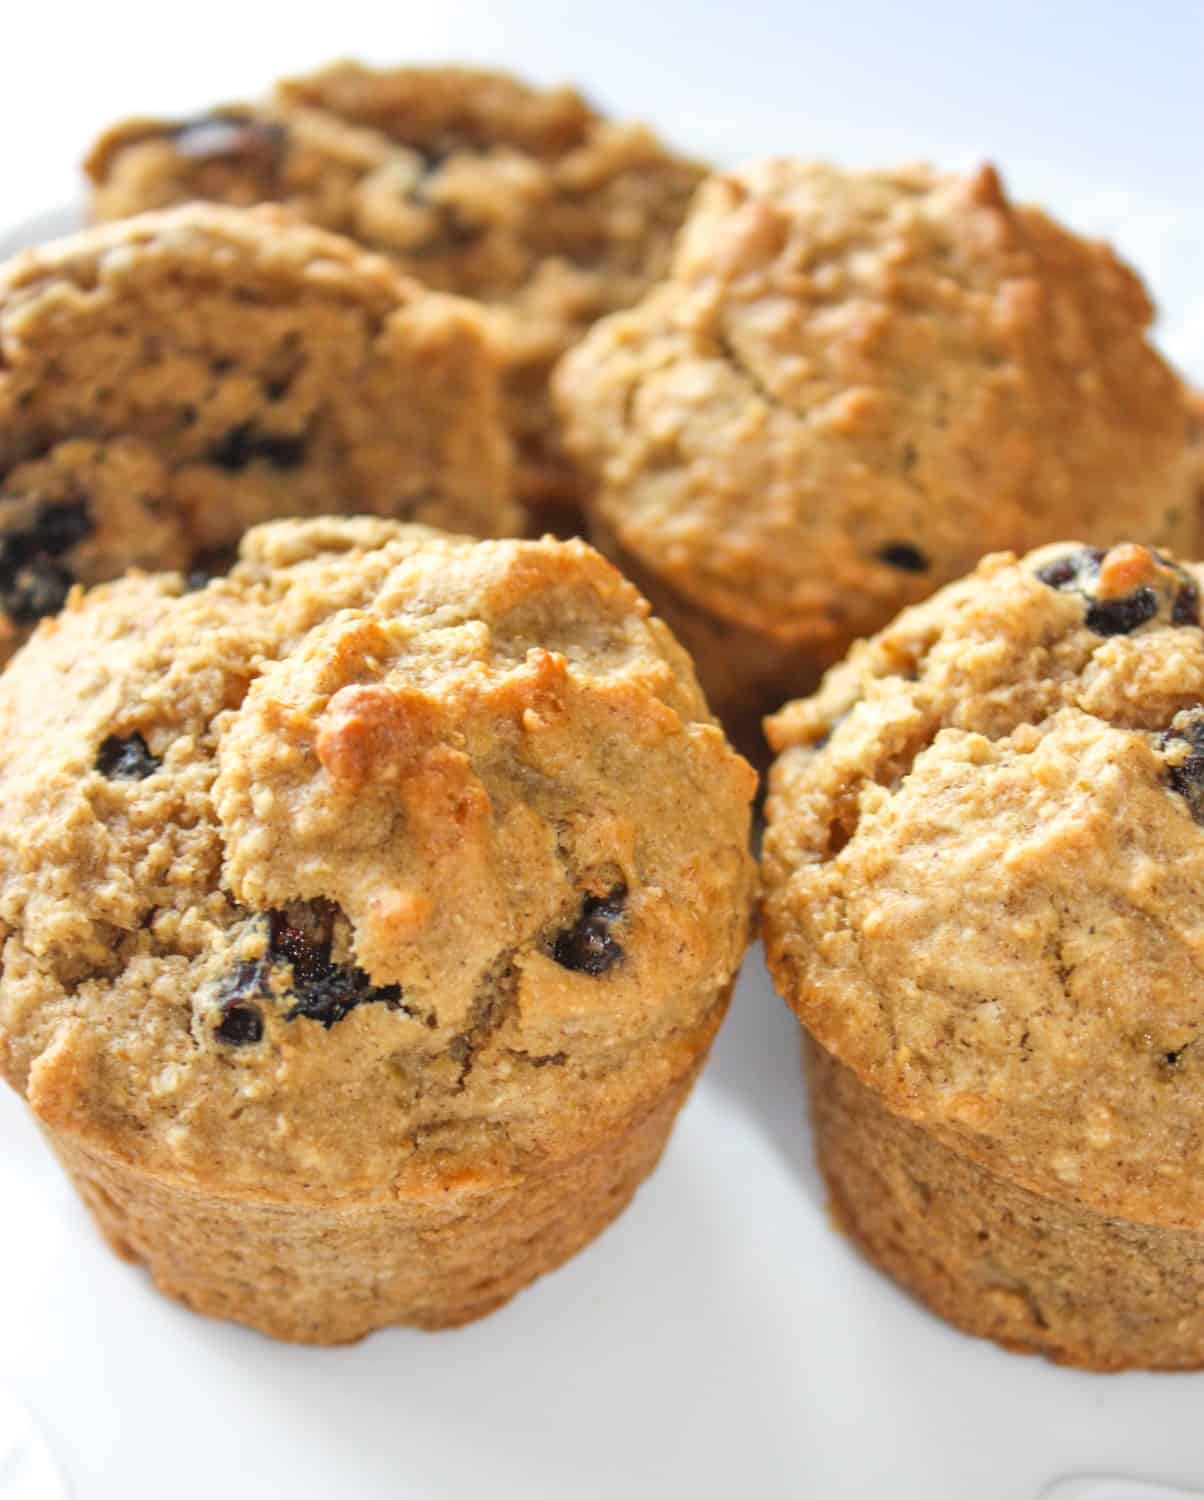 Raisin Oat Bran Muffins are a tasty way to add fibre to your diet. Finding gluten free oat bran means bran muffins are back even for the gluten intolerant!